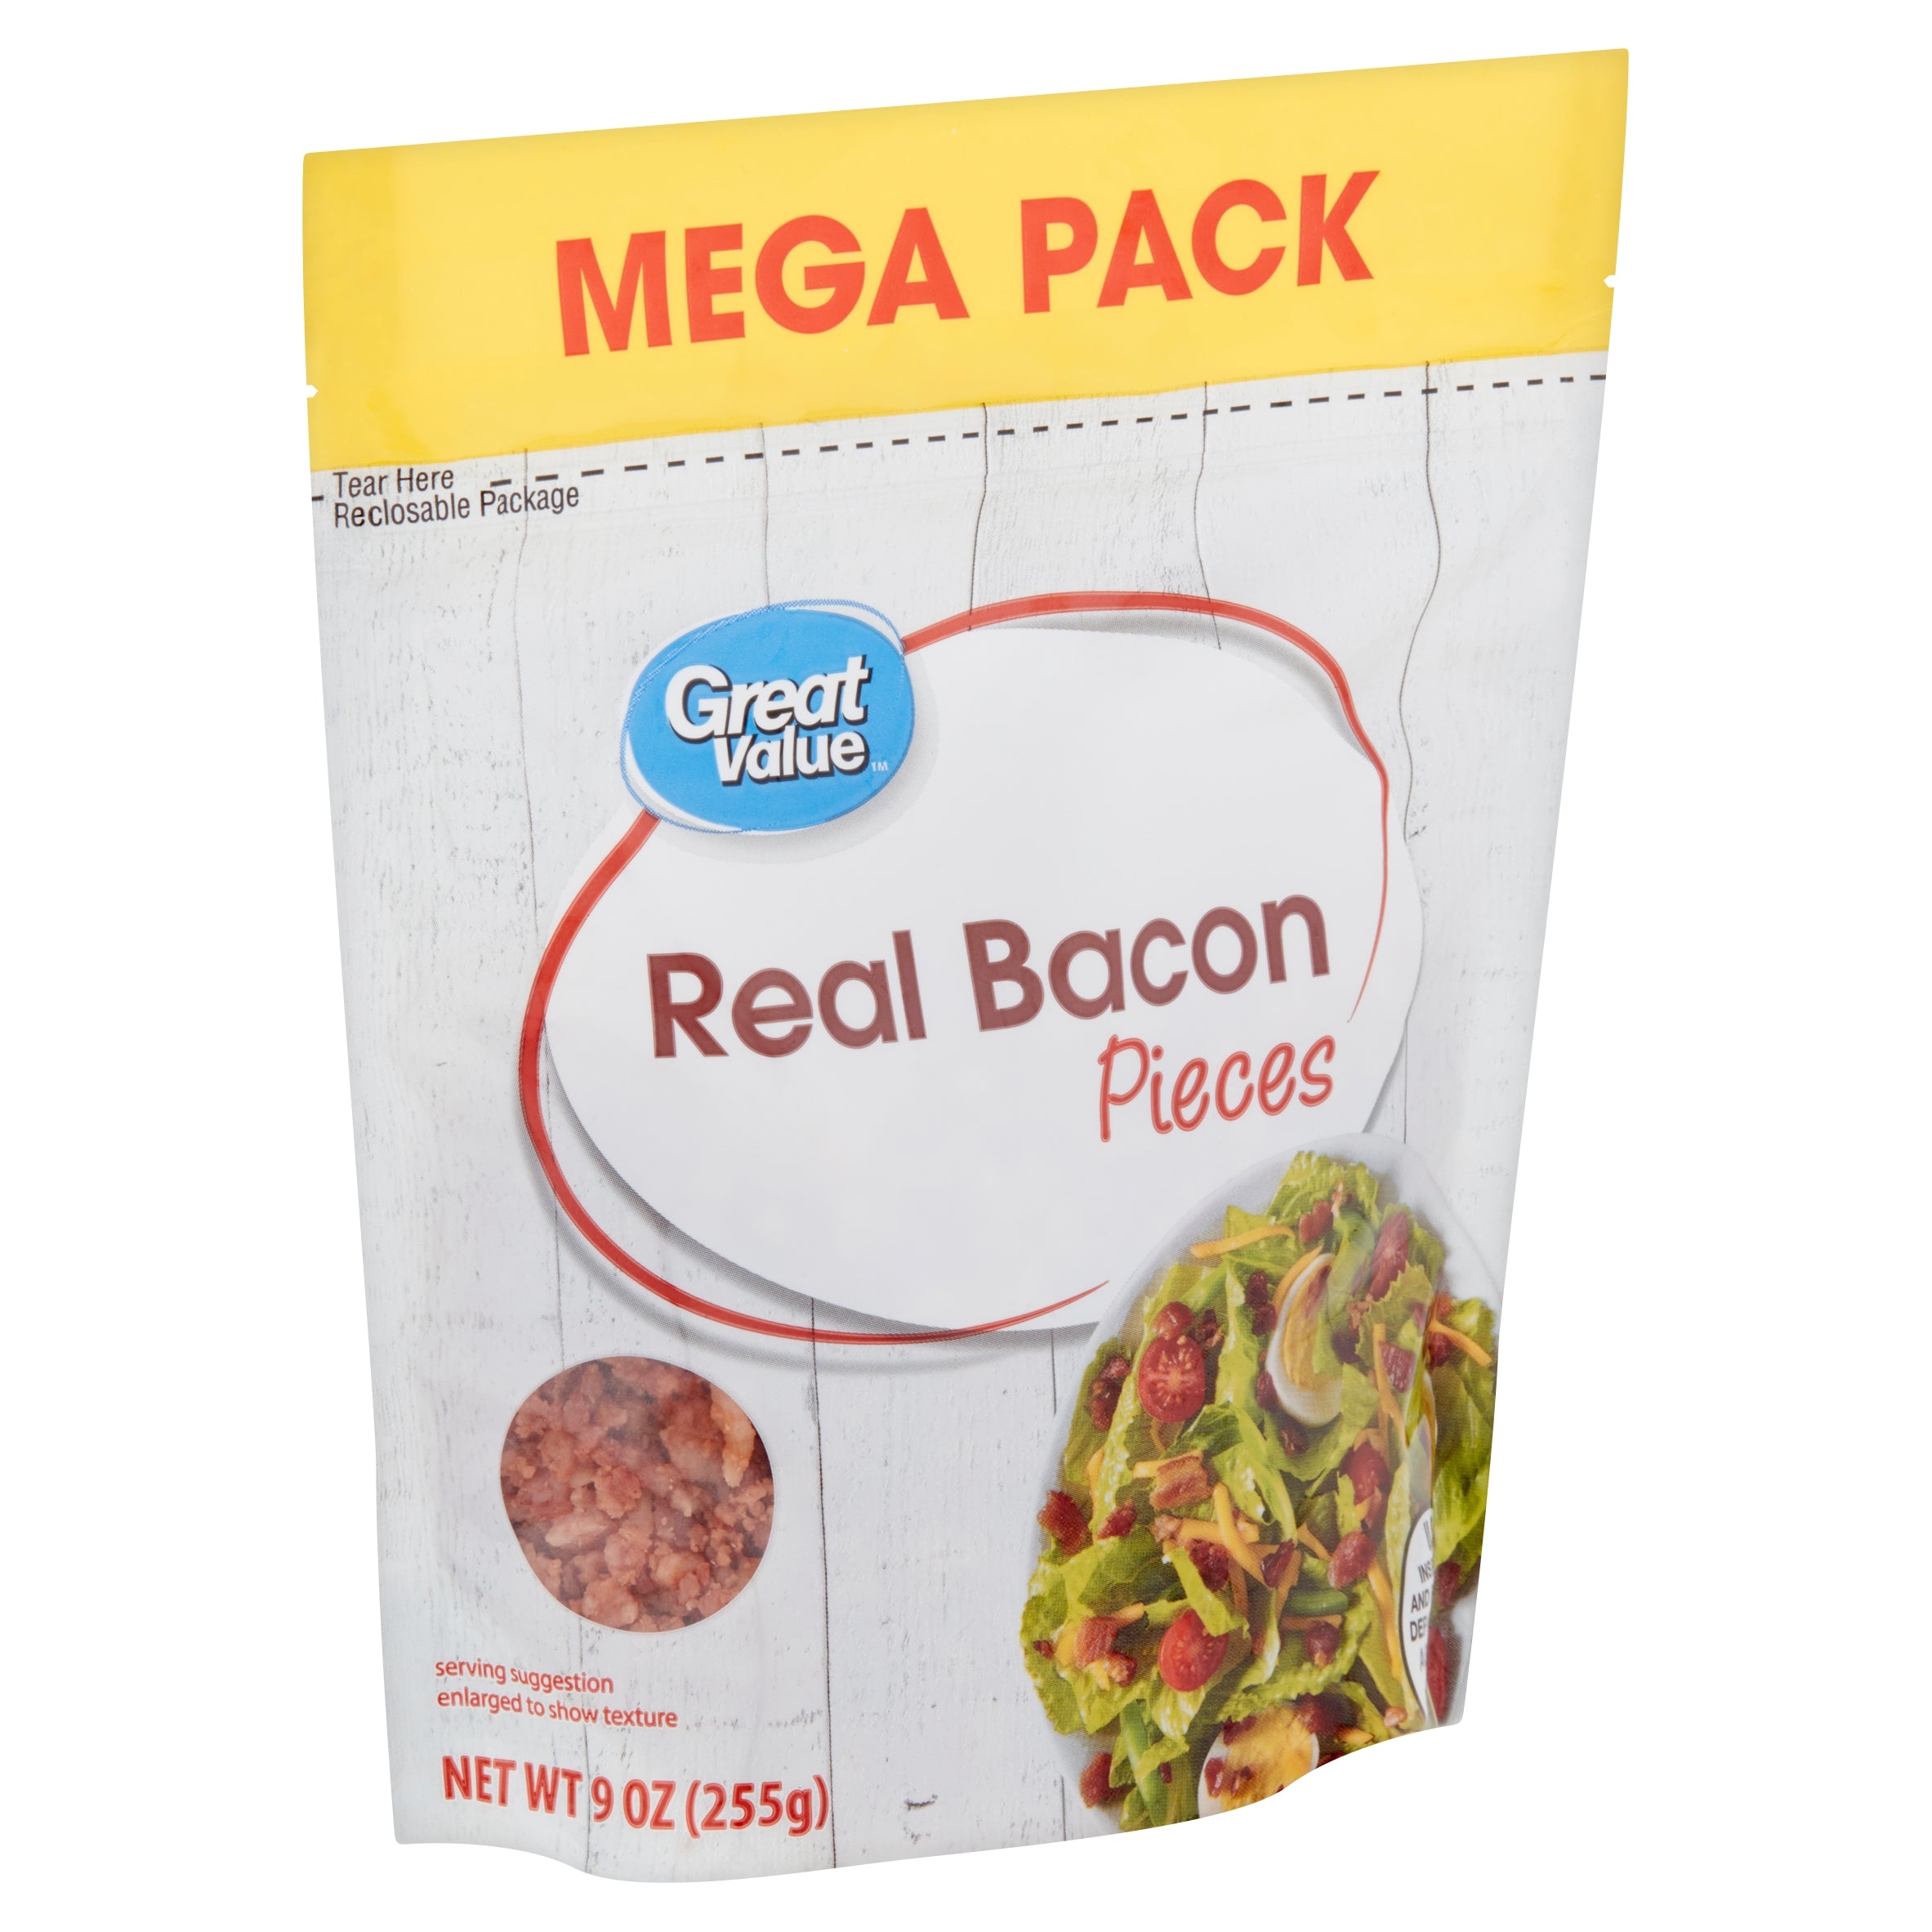 Great Value Real Bacon Pieces Mega Pack, 9 oz